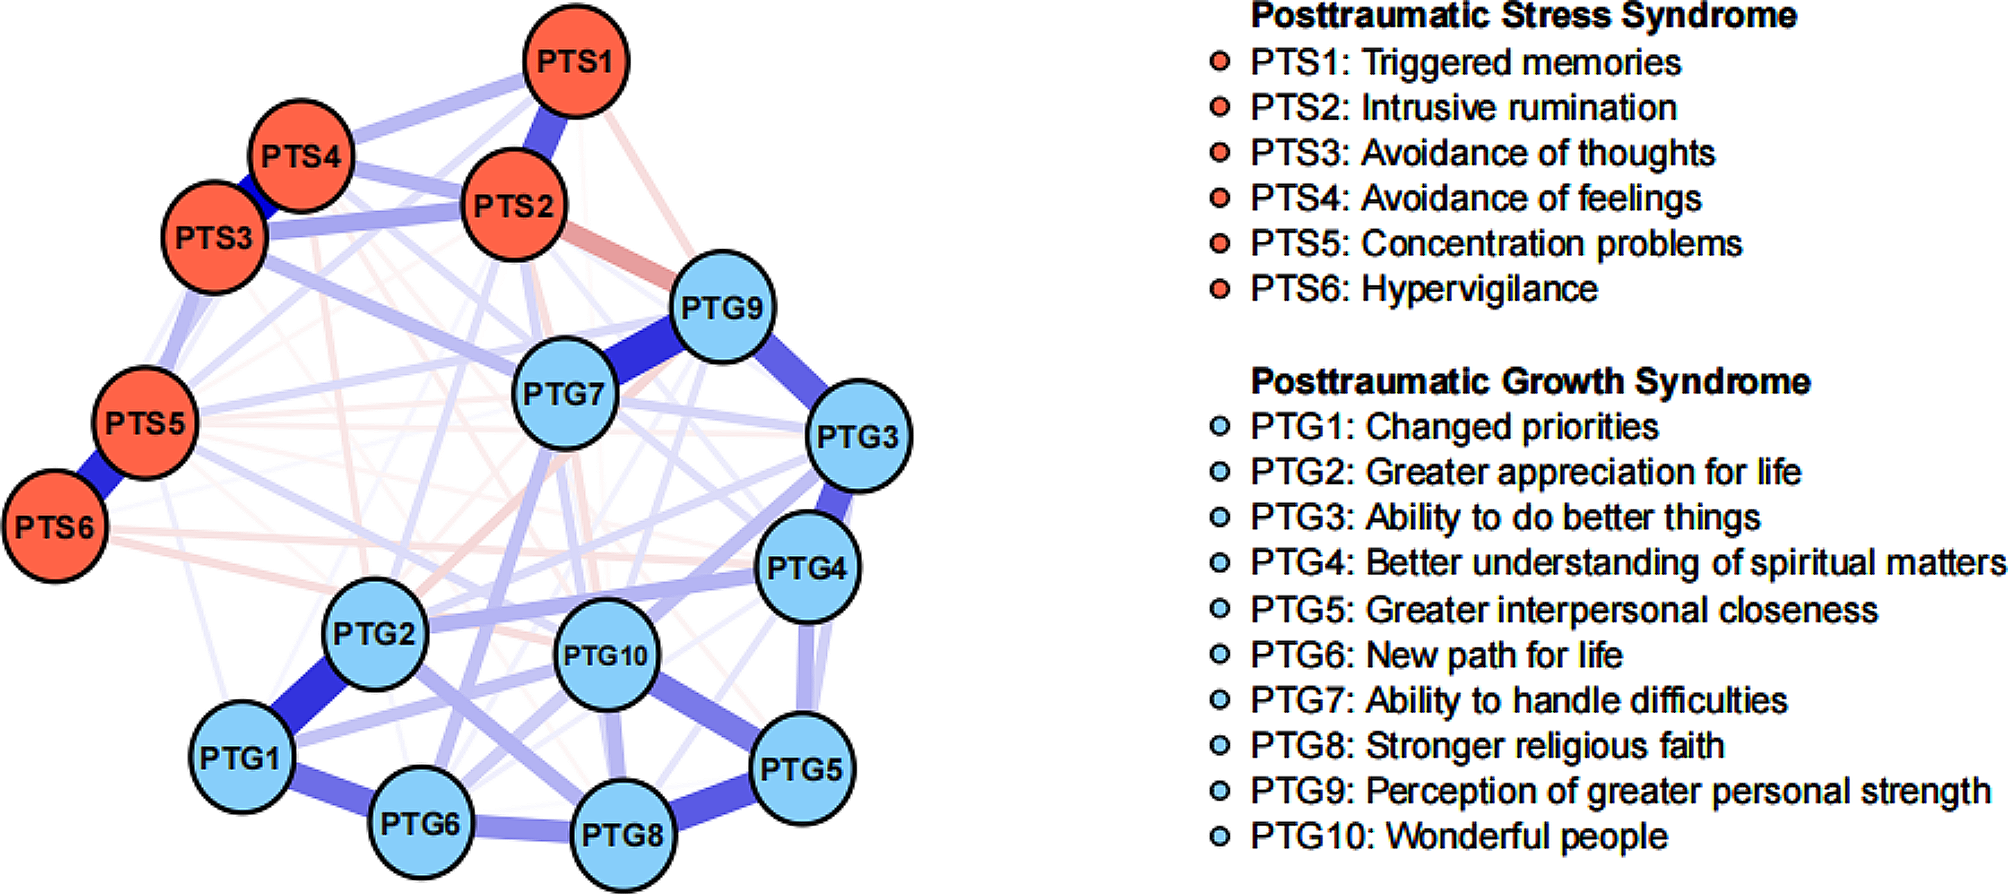 Network analysis of posttraumatic stress and posttraumatic growth symptoms among women in subsequent pregnancies following pregnancy loss